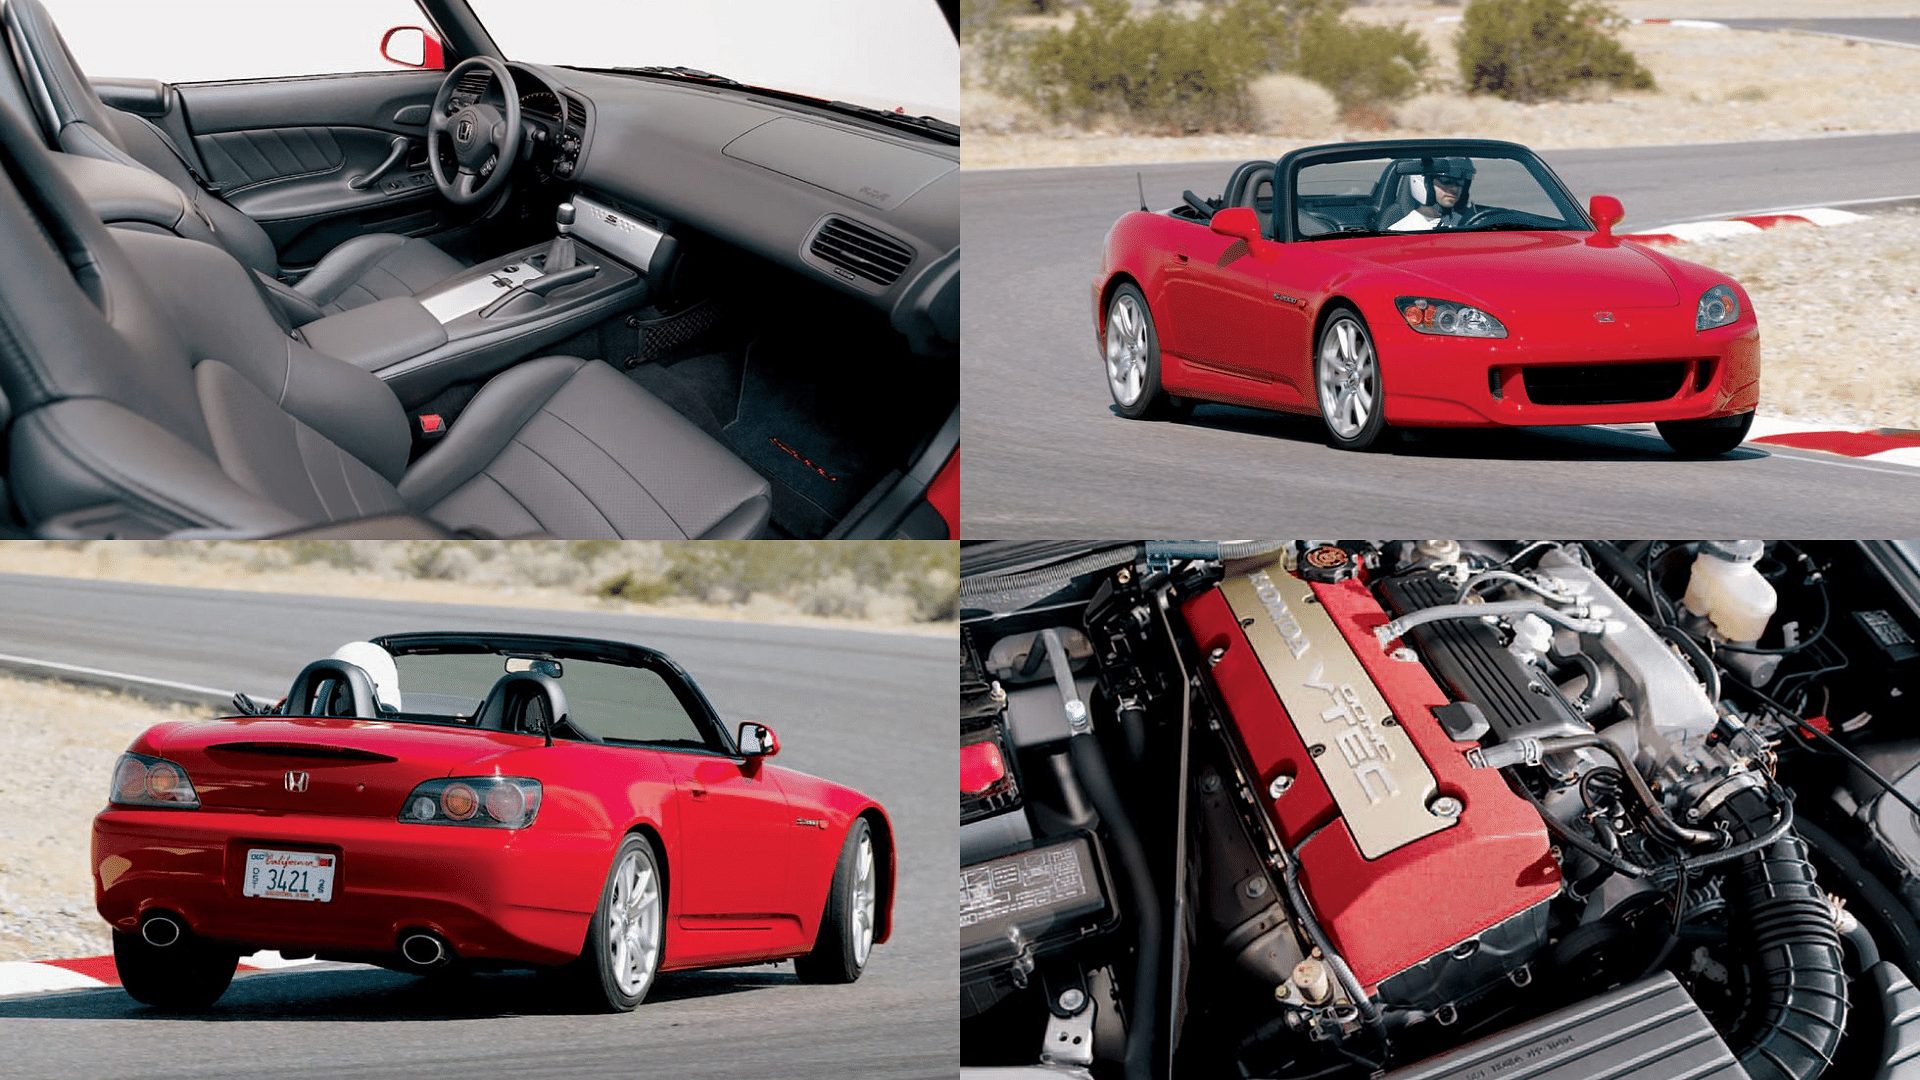 1999 Honda S2000 Convertible in Red - front view, rear view, interior, Honda DOHC VTEC engine